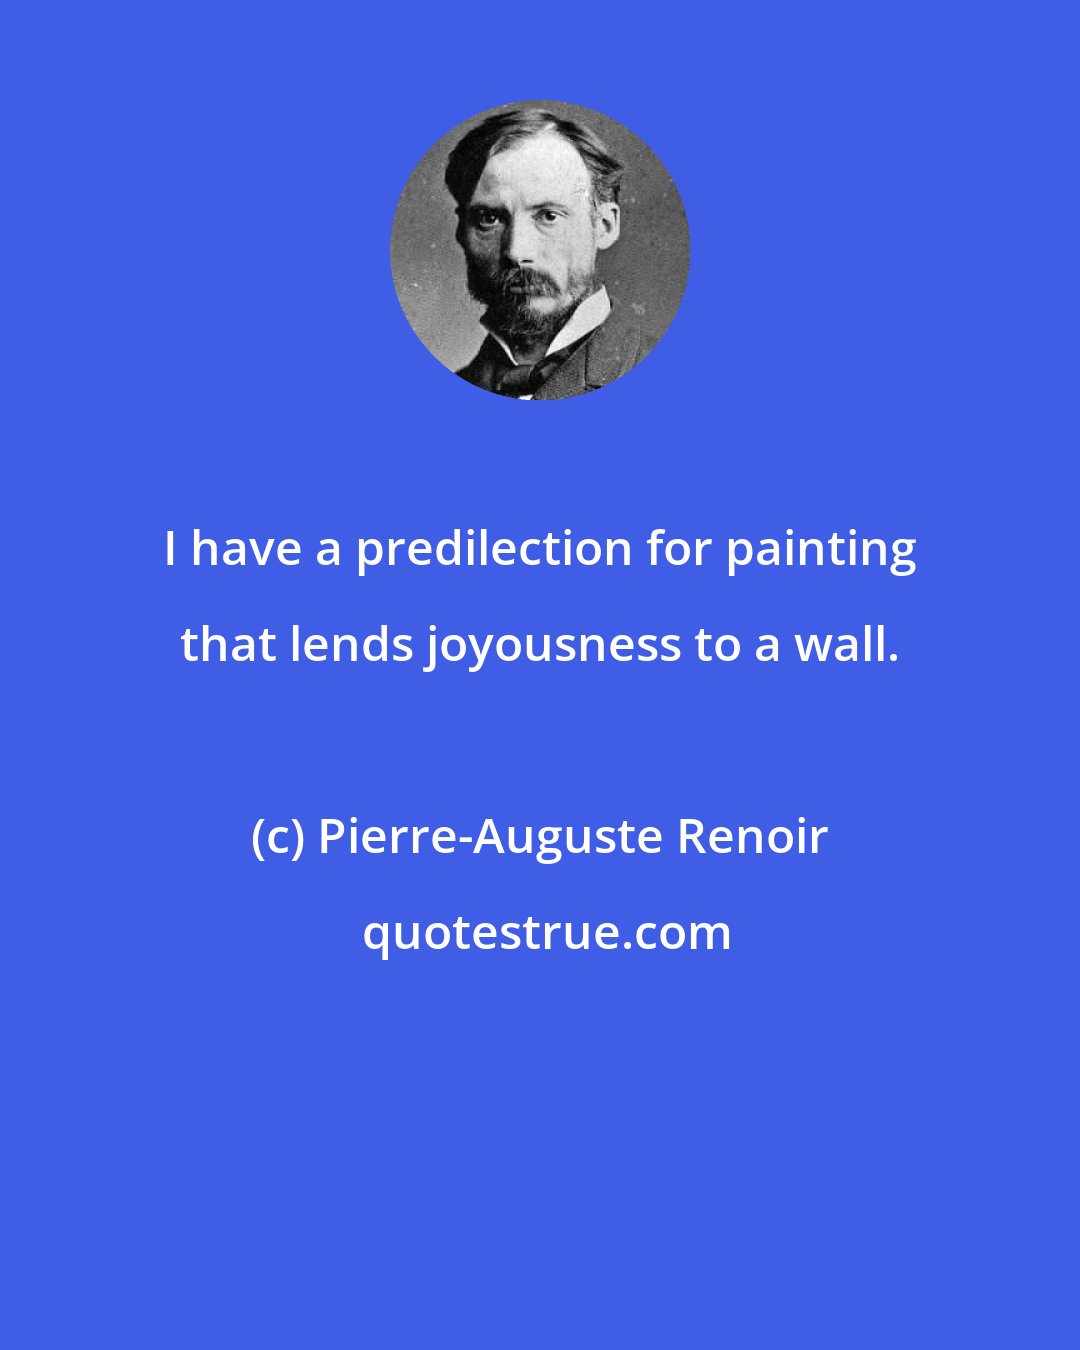 Pierre-Auguste Renoir: I have a predilection for painting that lends joyousness to a wall.